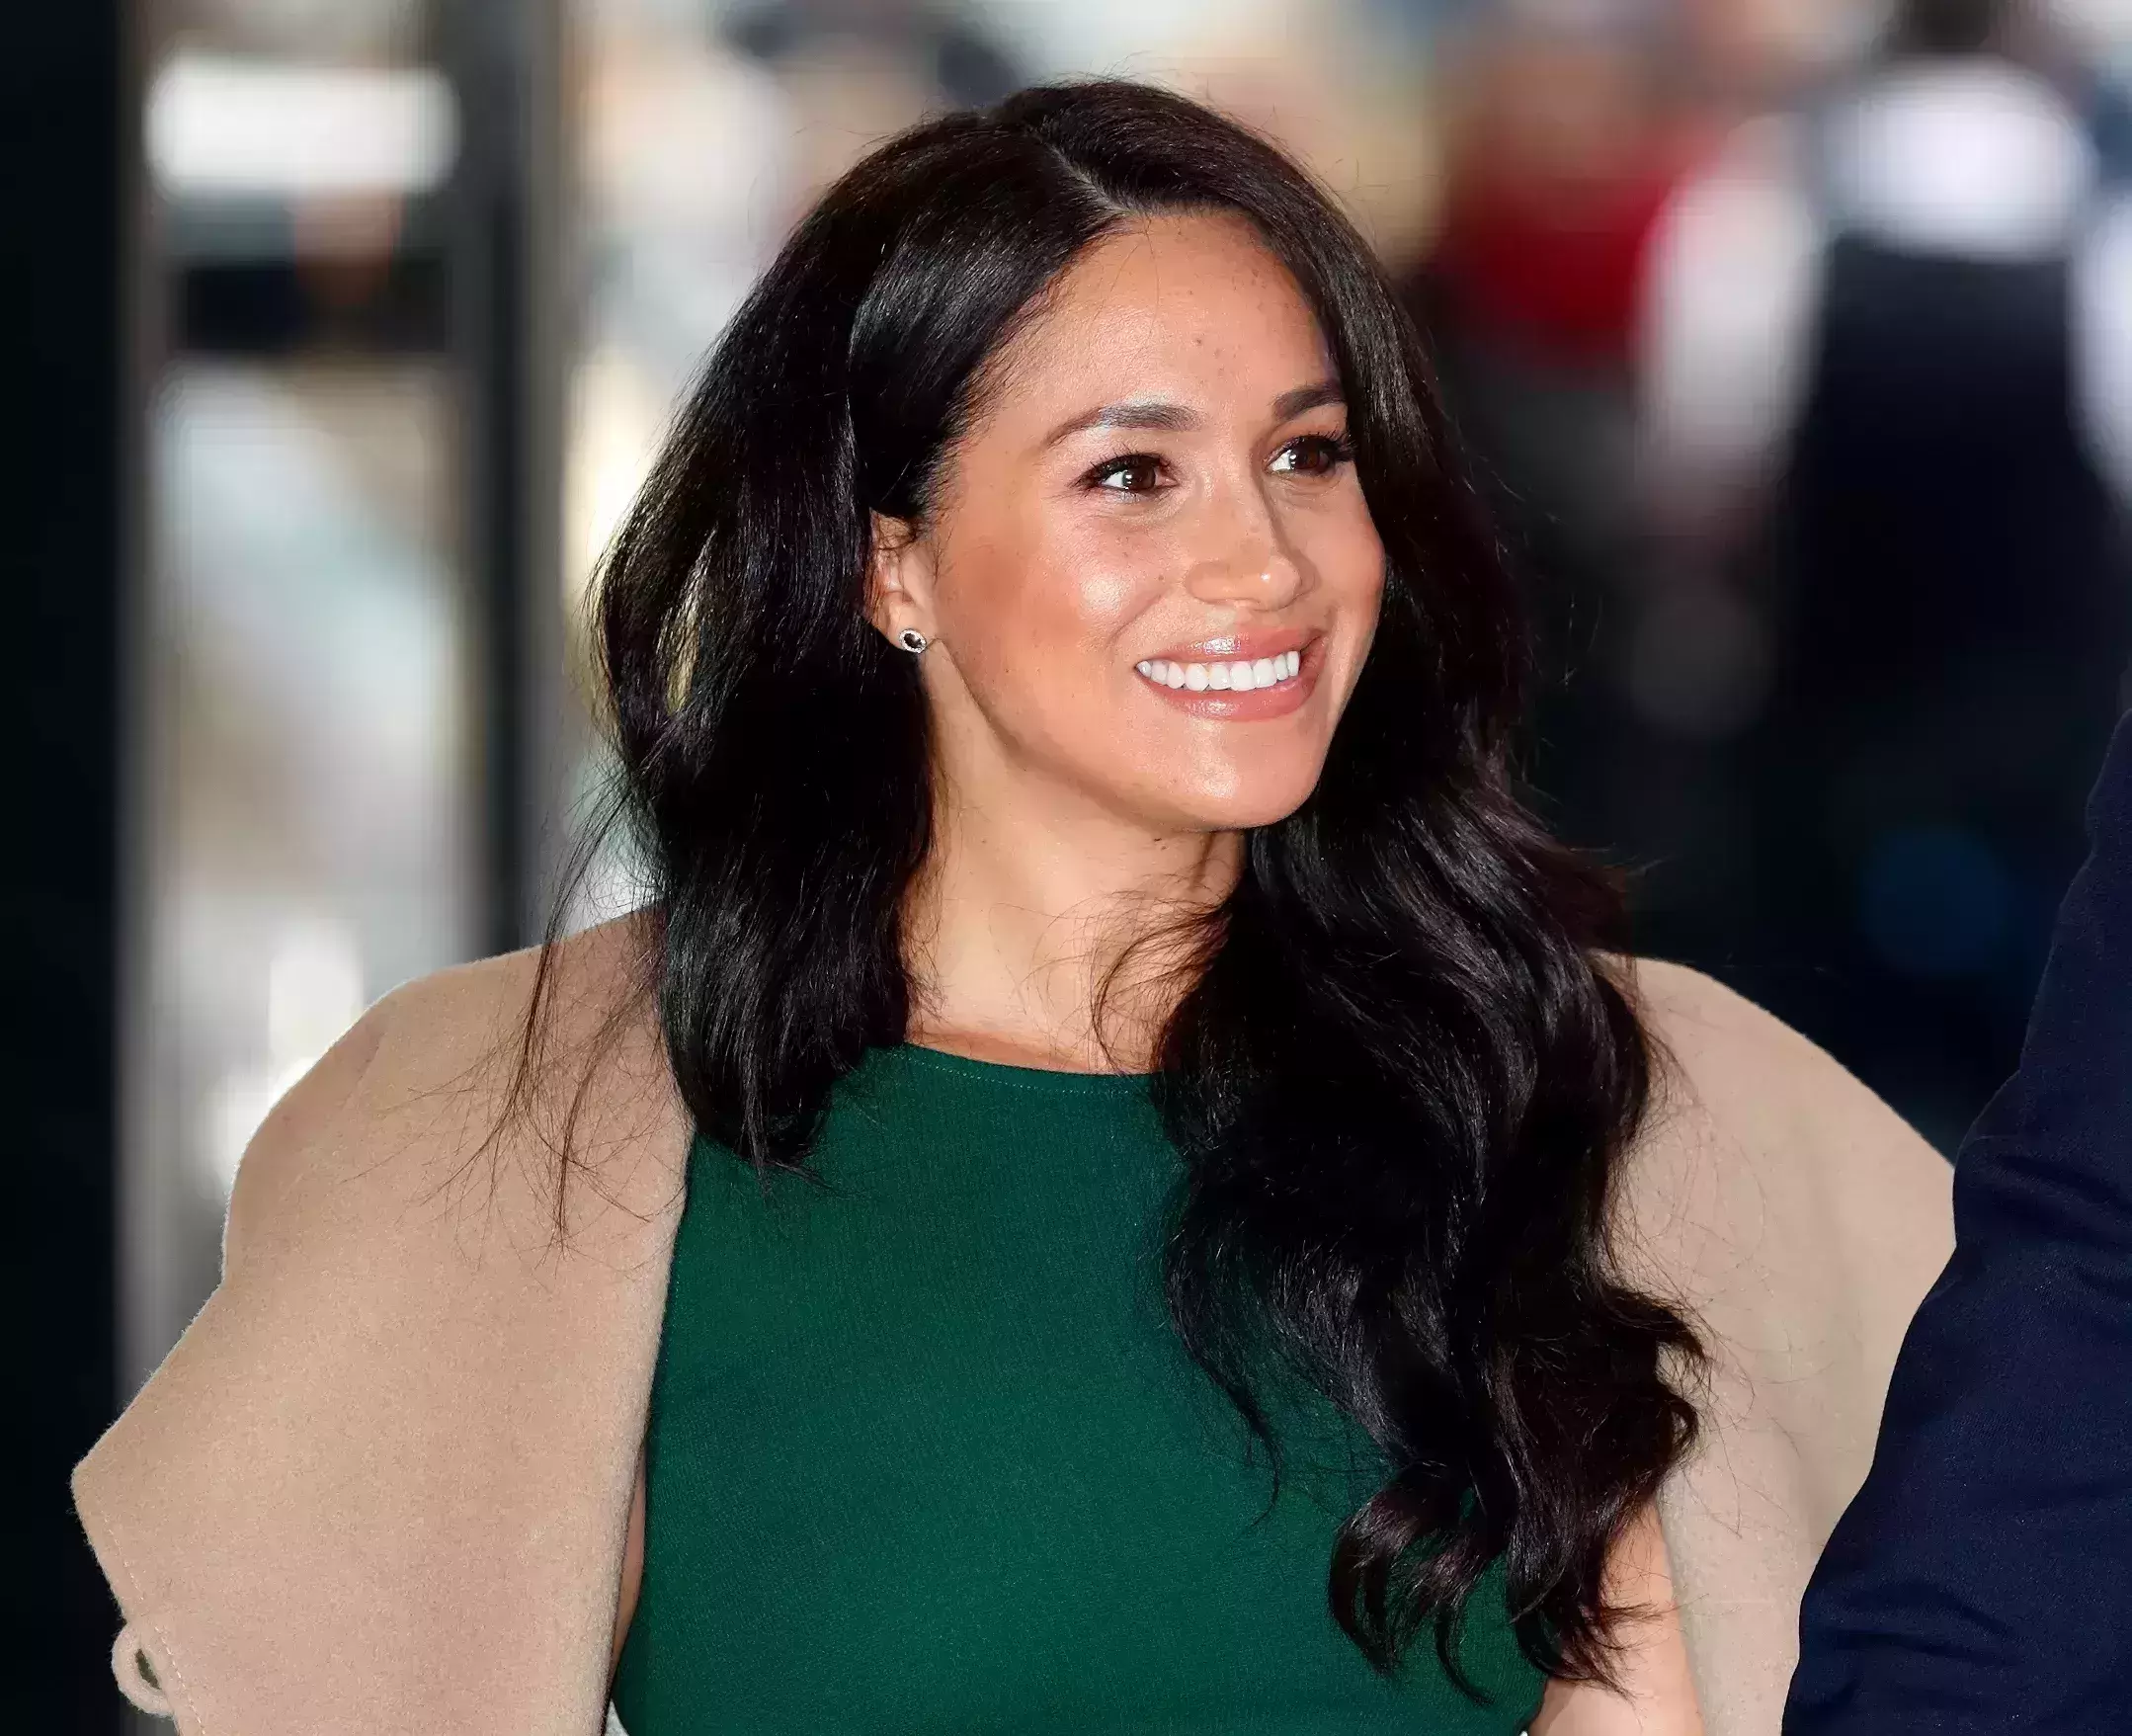 Meghan Markle launches Spotify podcast, Serena Williams stars in first episode